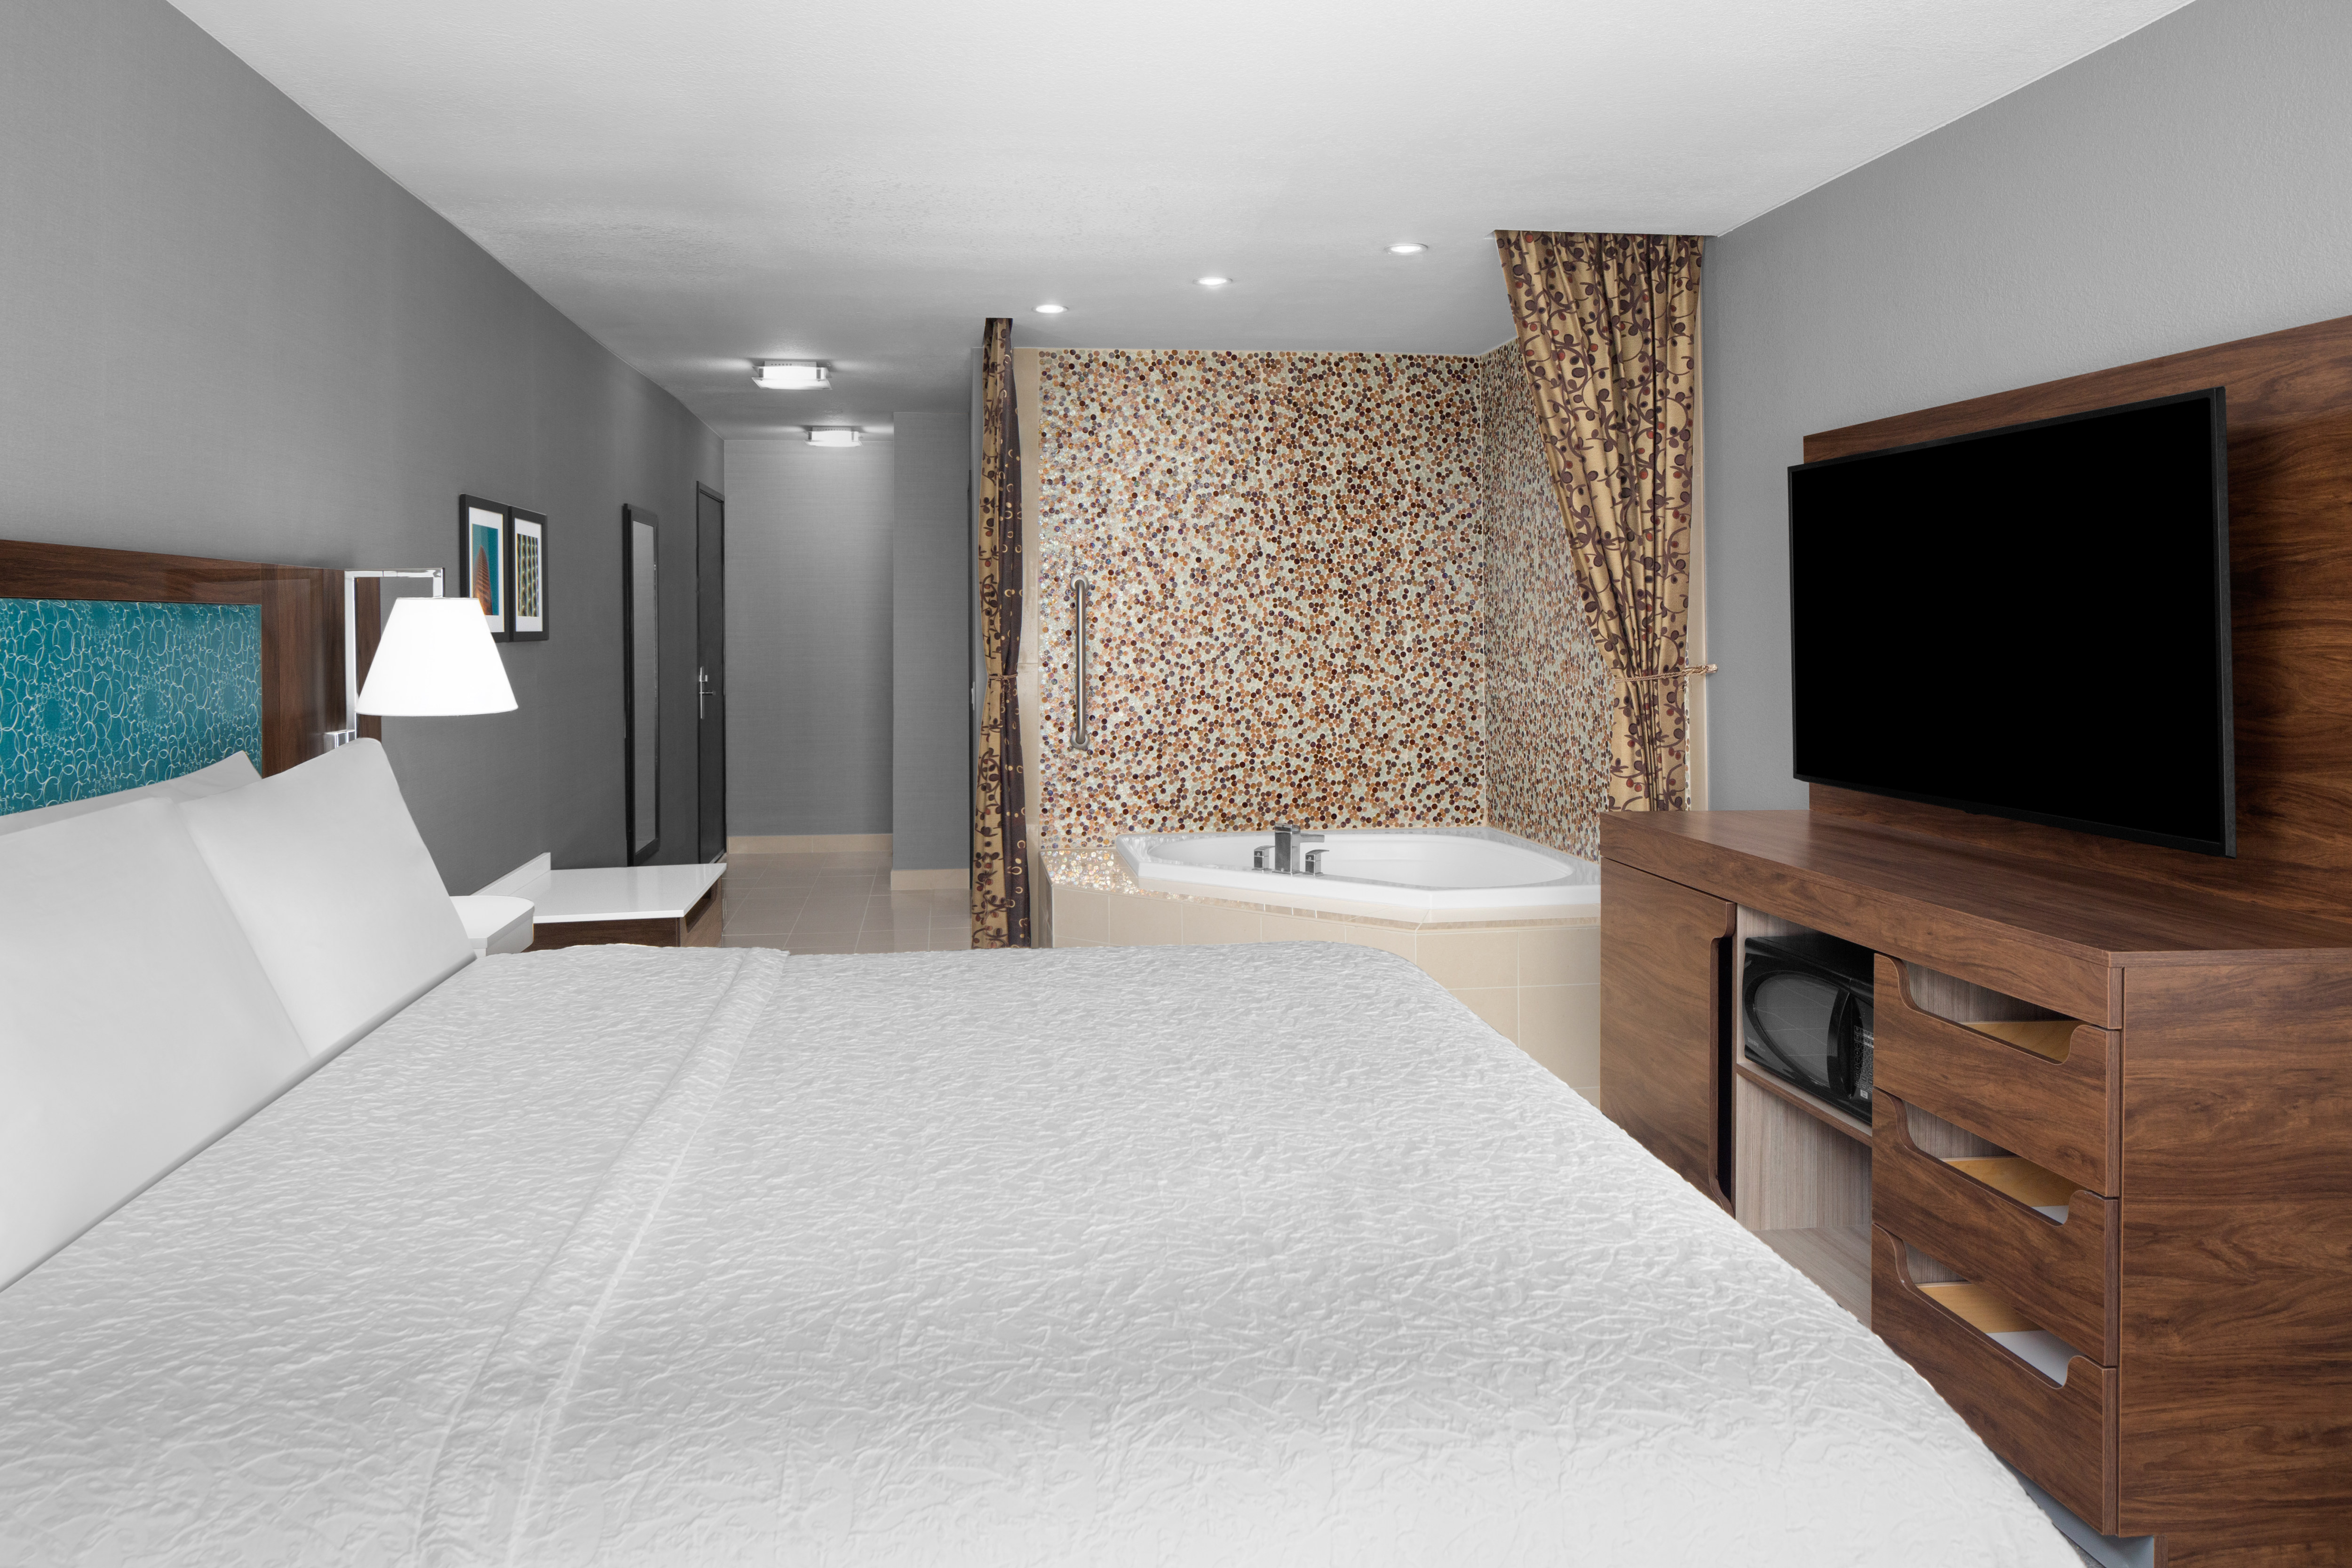 King Studio Suite With Whirlpool